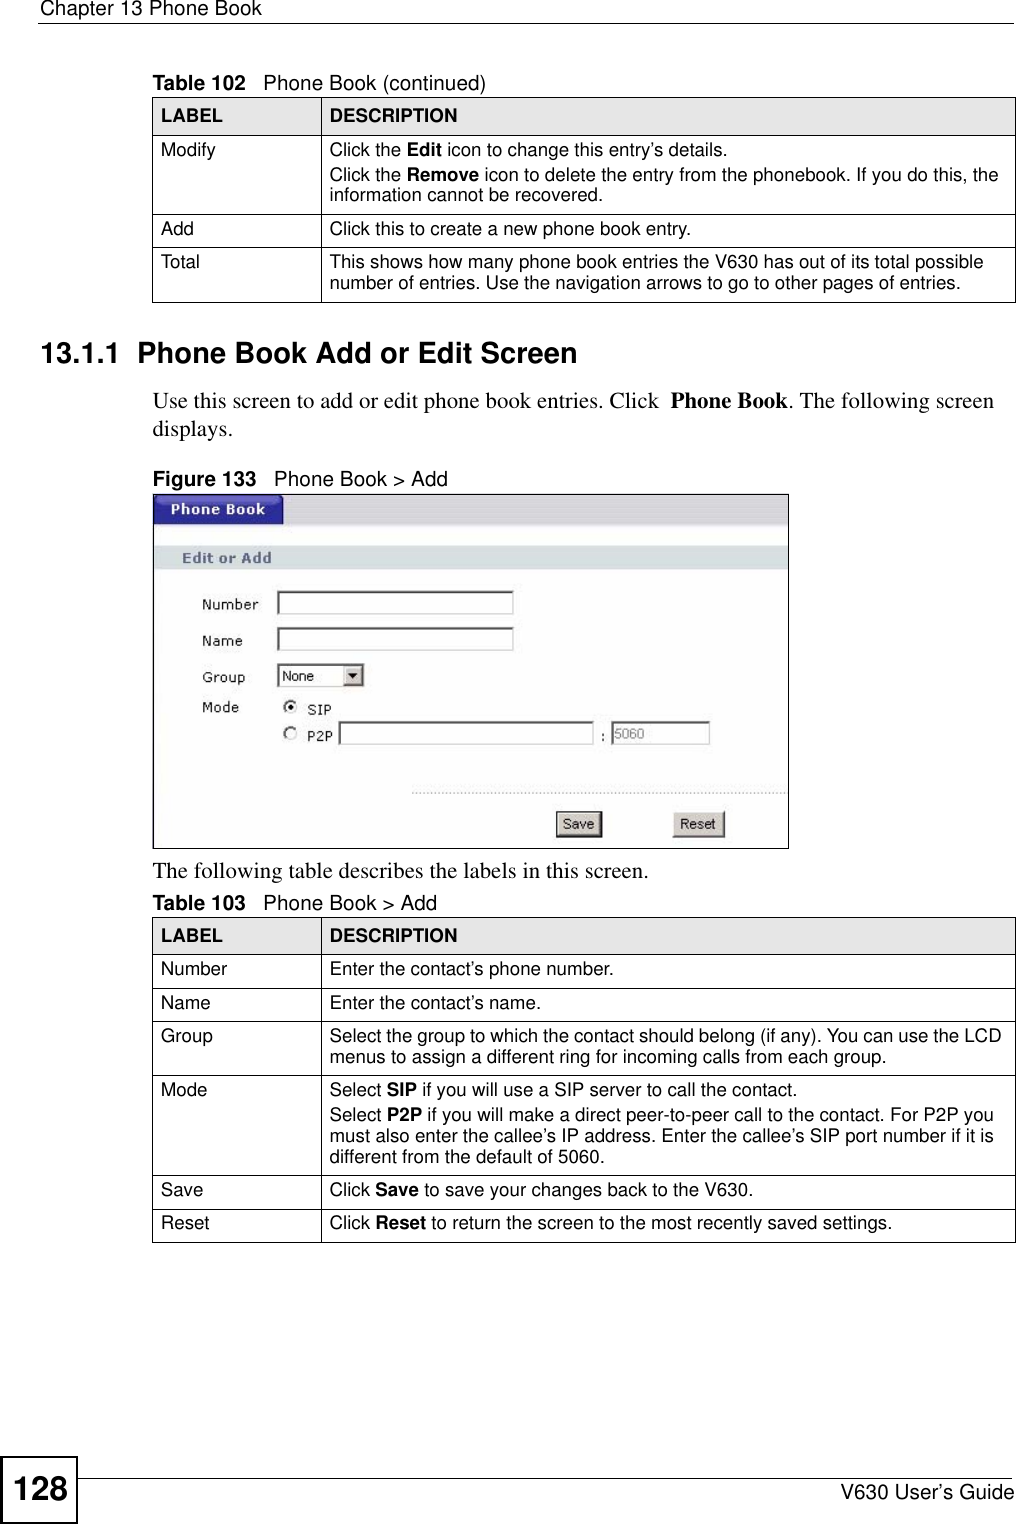 Chapter 13 Phone BookV630 User’s Guide12813.1.1  Phone Book Add or Edit ScreenUse this screen to add or edit phone book entries. Click  Phone Book. The following screen displays.Figure 133   Phone Book &gt; AddThe following table describes the labels in this screen. Modify Click the Edit icon to change this entry’s details.Click the Remove icon to delete the entry from the phonebook. If you do this, the information cannot be recovered.Add Click this to create a new phone book entry.Total This shows how many phone book entries the V630 has out of its total possible number of entries. Use the navigation arrows to go to other pages of entries. Table 102   Phone Book (continued)LABEL DESCRIPTIONTable 103   Phone Book &gt; AddLABEL DESCRIPTIONNumber Enter the contact’s phone number.Name Enter the contact’s name.Group Select the group to which the contact should belong (if any). You can use the LCD menus to assign a different ring for incoming calls from each group. Mode Select SIP if you will use a SIP server to call the contact. Select P2P if you will make a direct peer-to-peer call to the contact. For P2P you must also enter the callee’s IP address. Enter the callee’s SIP port number if it is different from the default of 5060.Save Click Save to save your changes back to the V630.Reset Click Reset to return the screen to the most recently saved settings. 